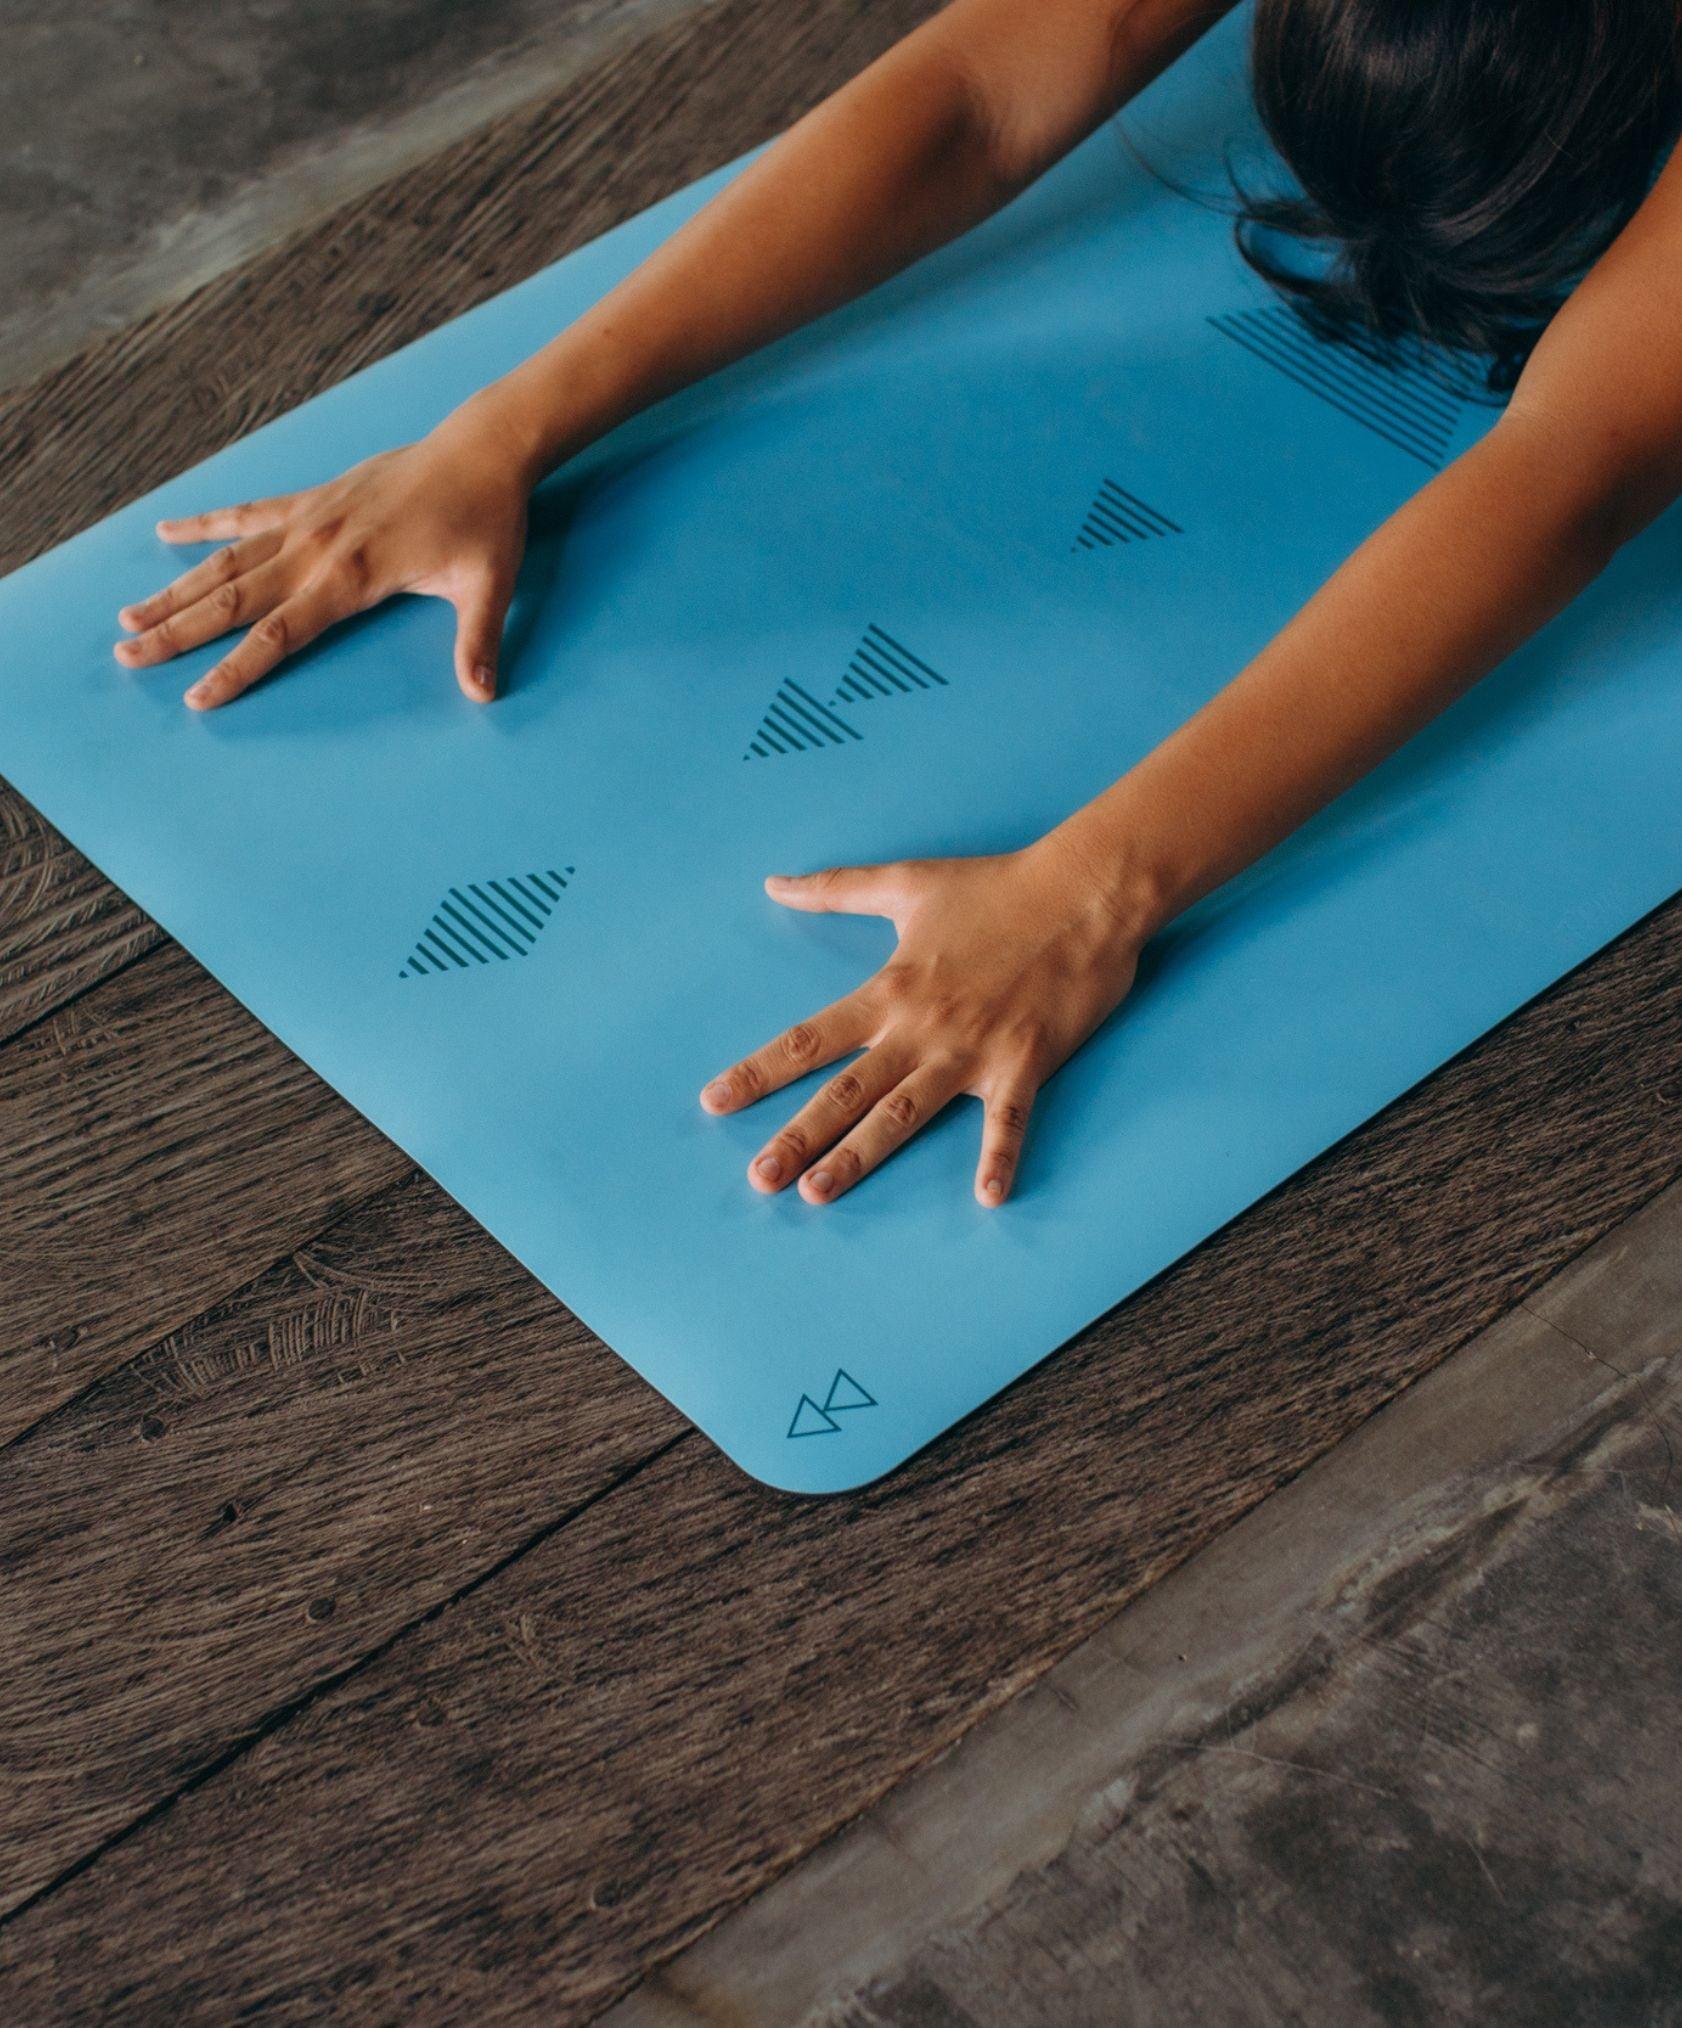 YDL Infinity Yoga Mat - Best Workout & Exercise Mat